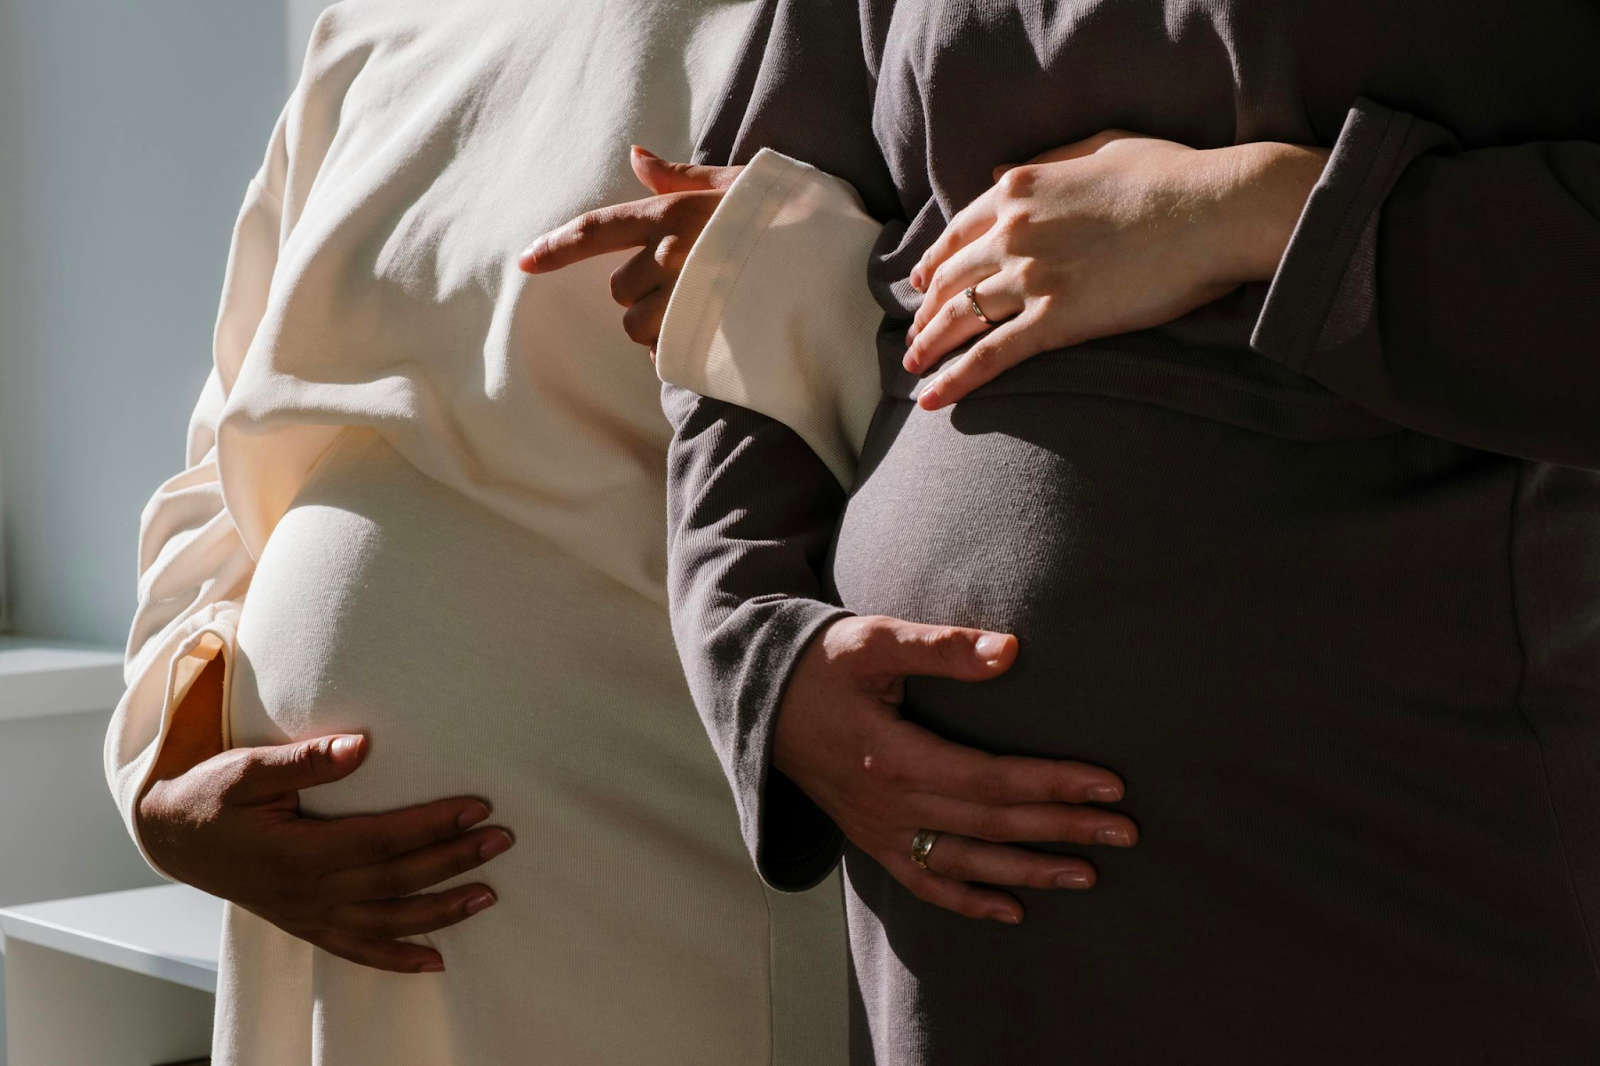 Two pregnant women holding their stomachs, one in black and one in white